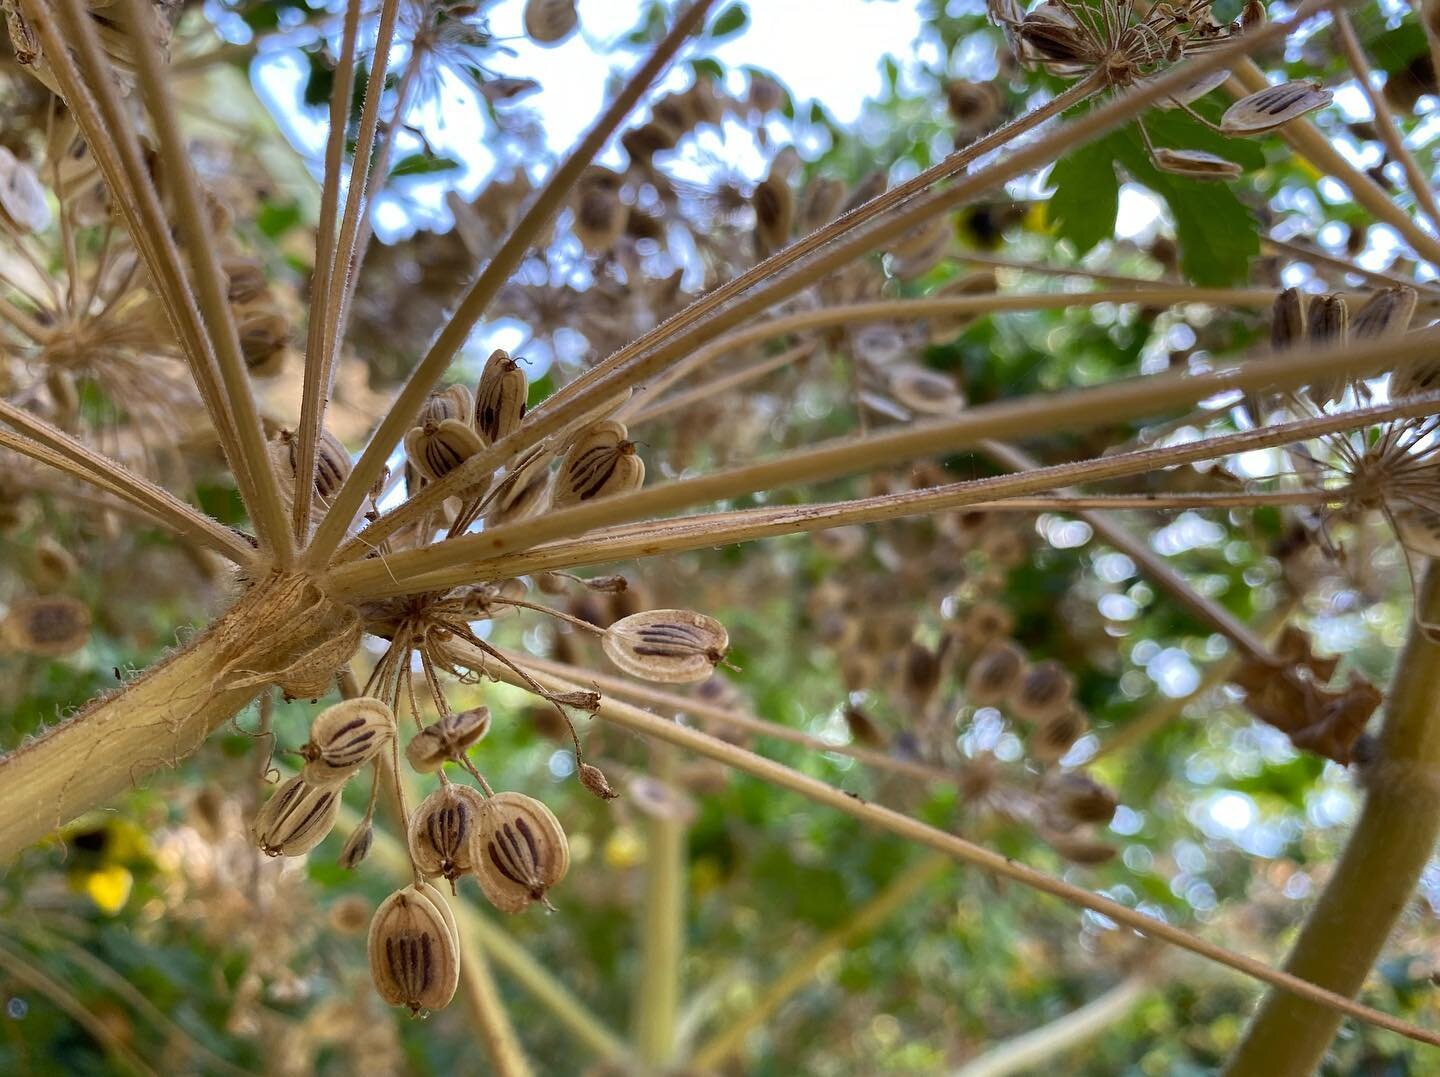 Heracleum structural superstar in senescence (2/2): once the dominant overstory showstopper, the Cow Parsnip now is a supportive understory to a Clematis tangutica &lsquo;Golden Harvest&rsquo; vine just beginning to bloom.  More seedhead drama to fol